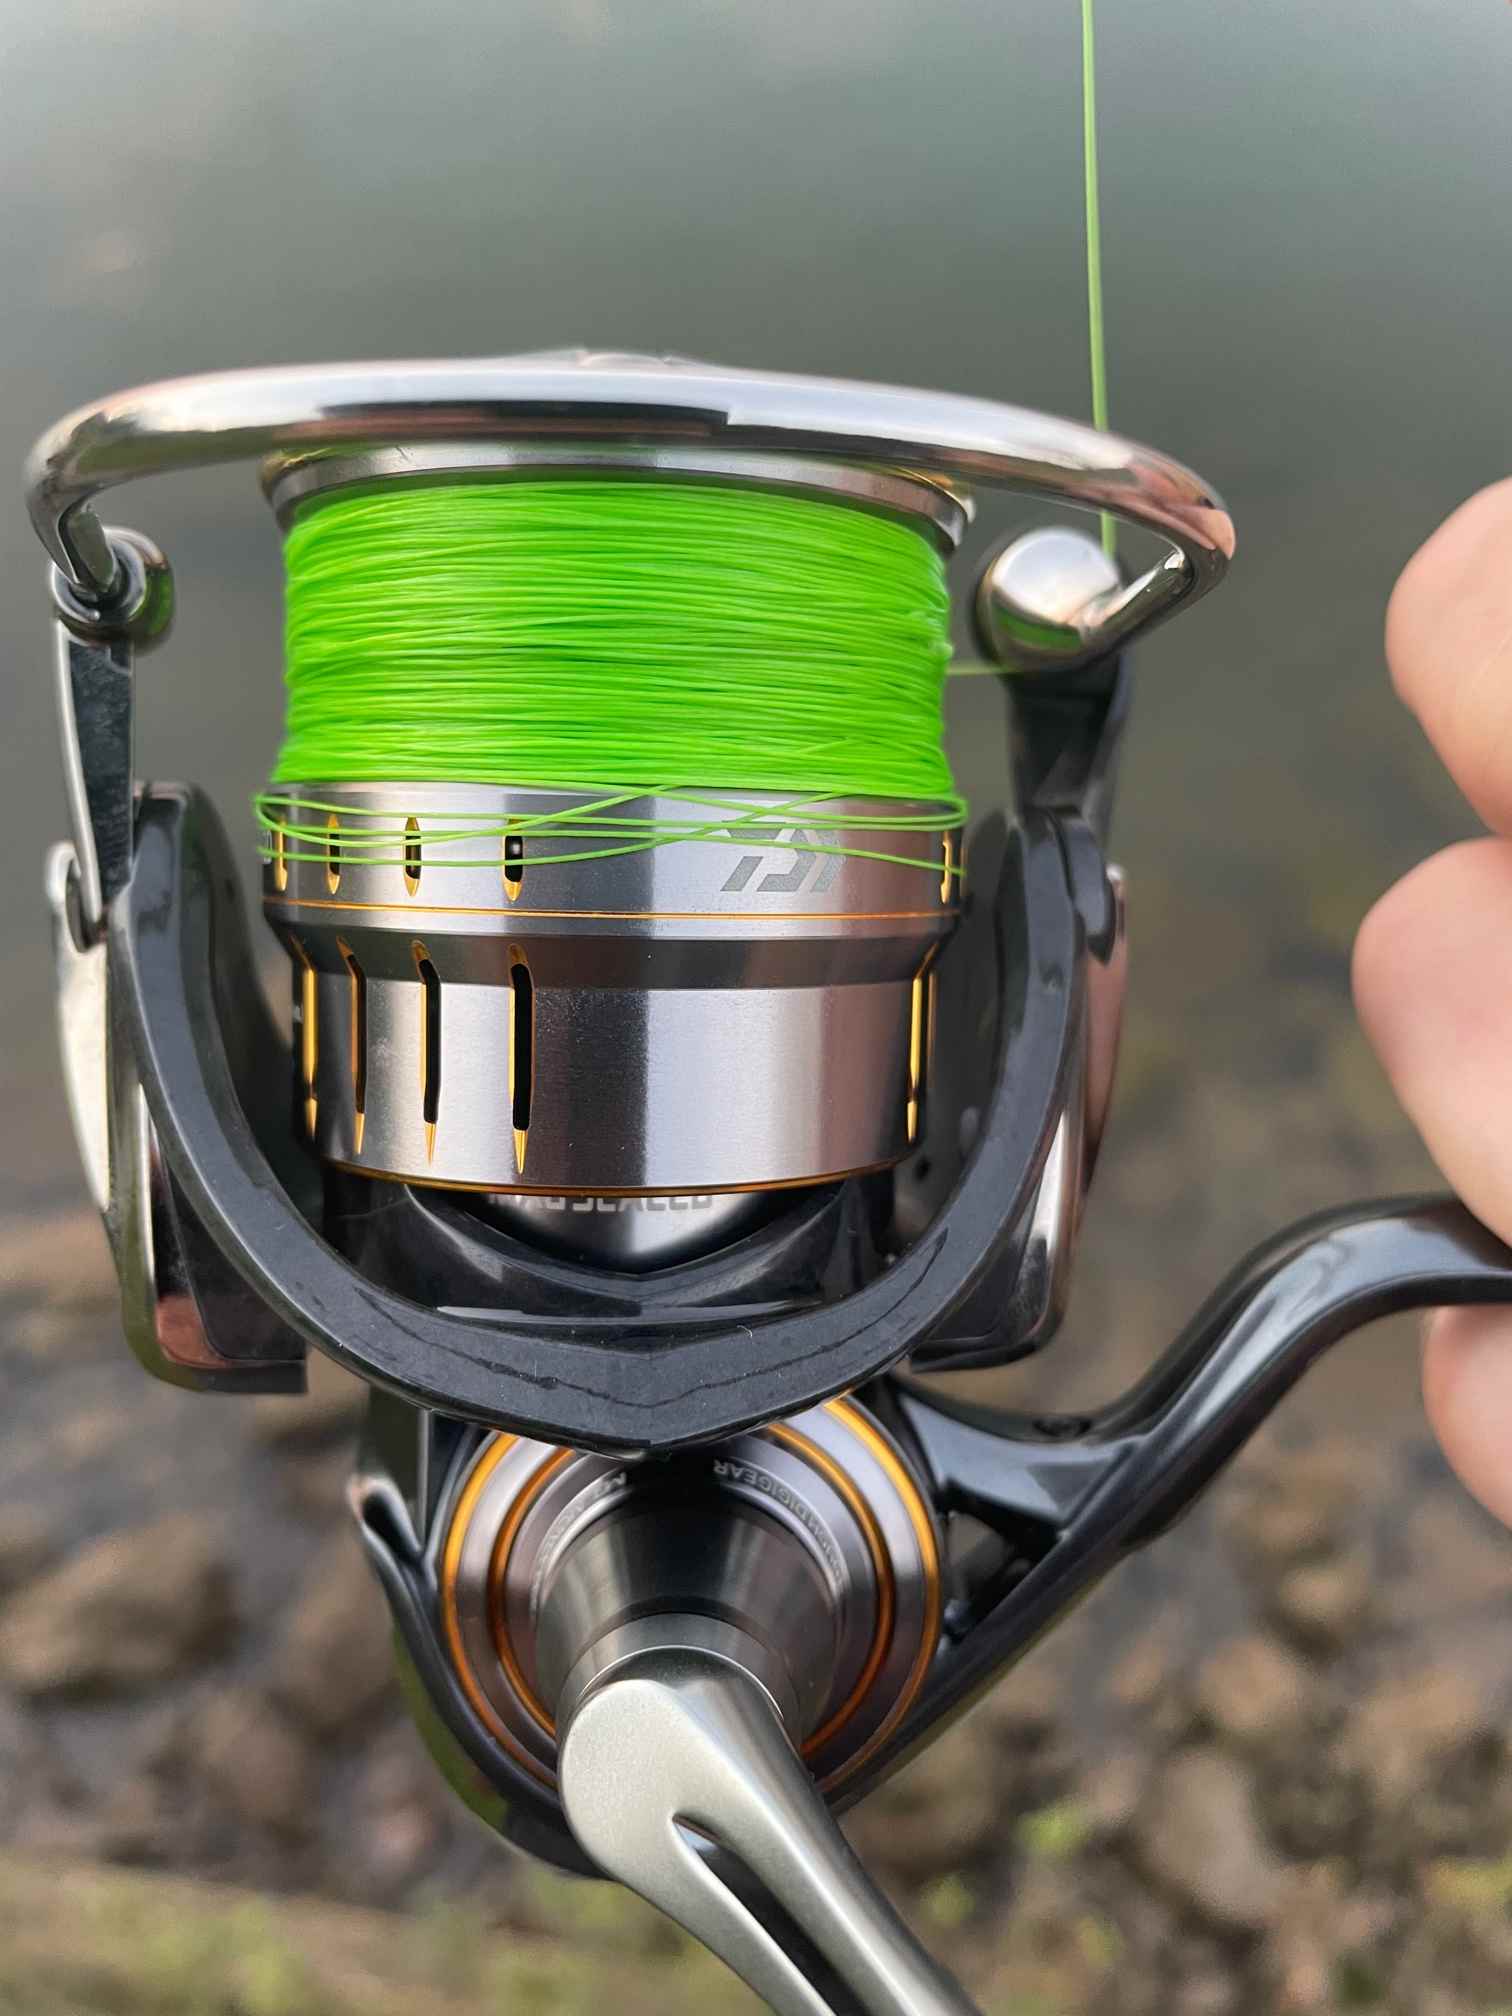 Spinning Reels, Fishing Tackle Deals